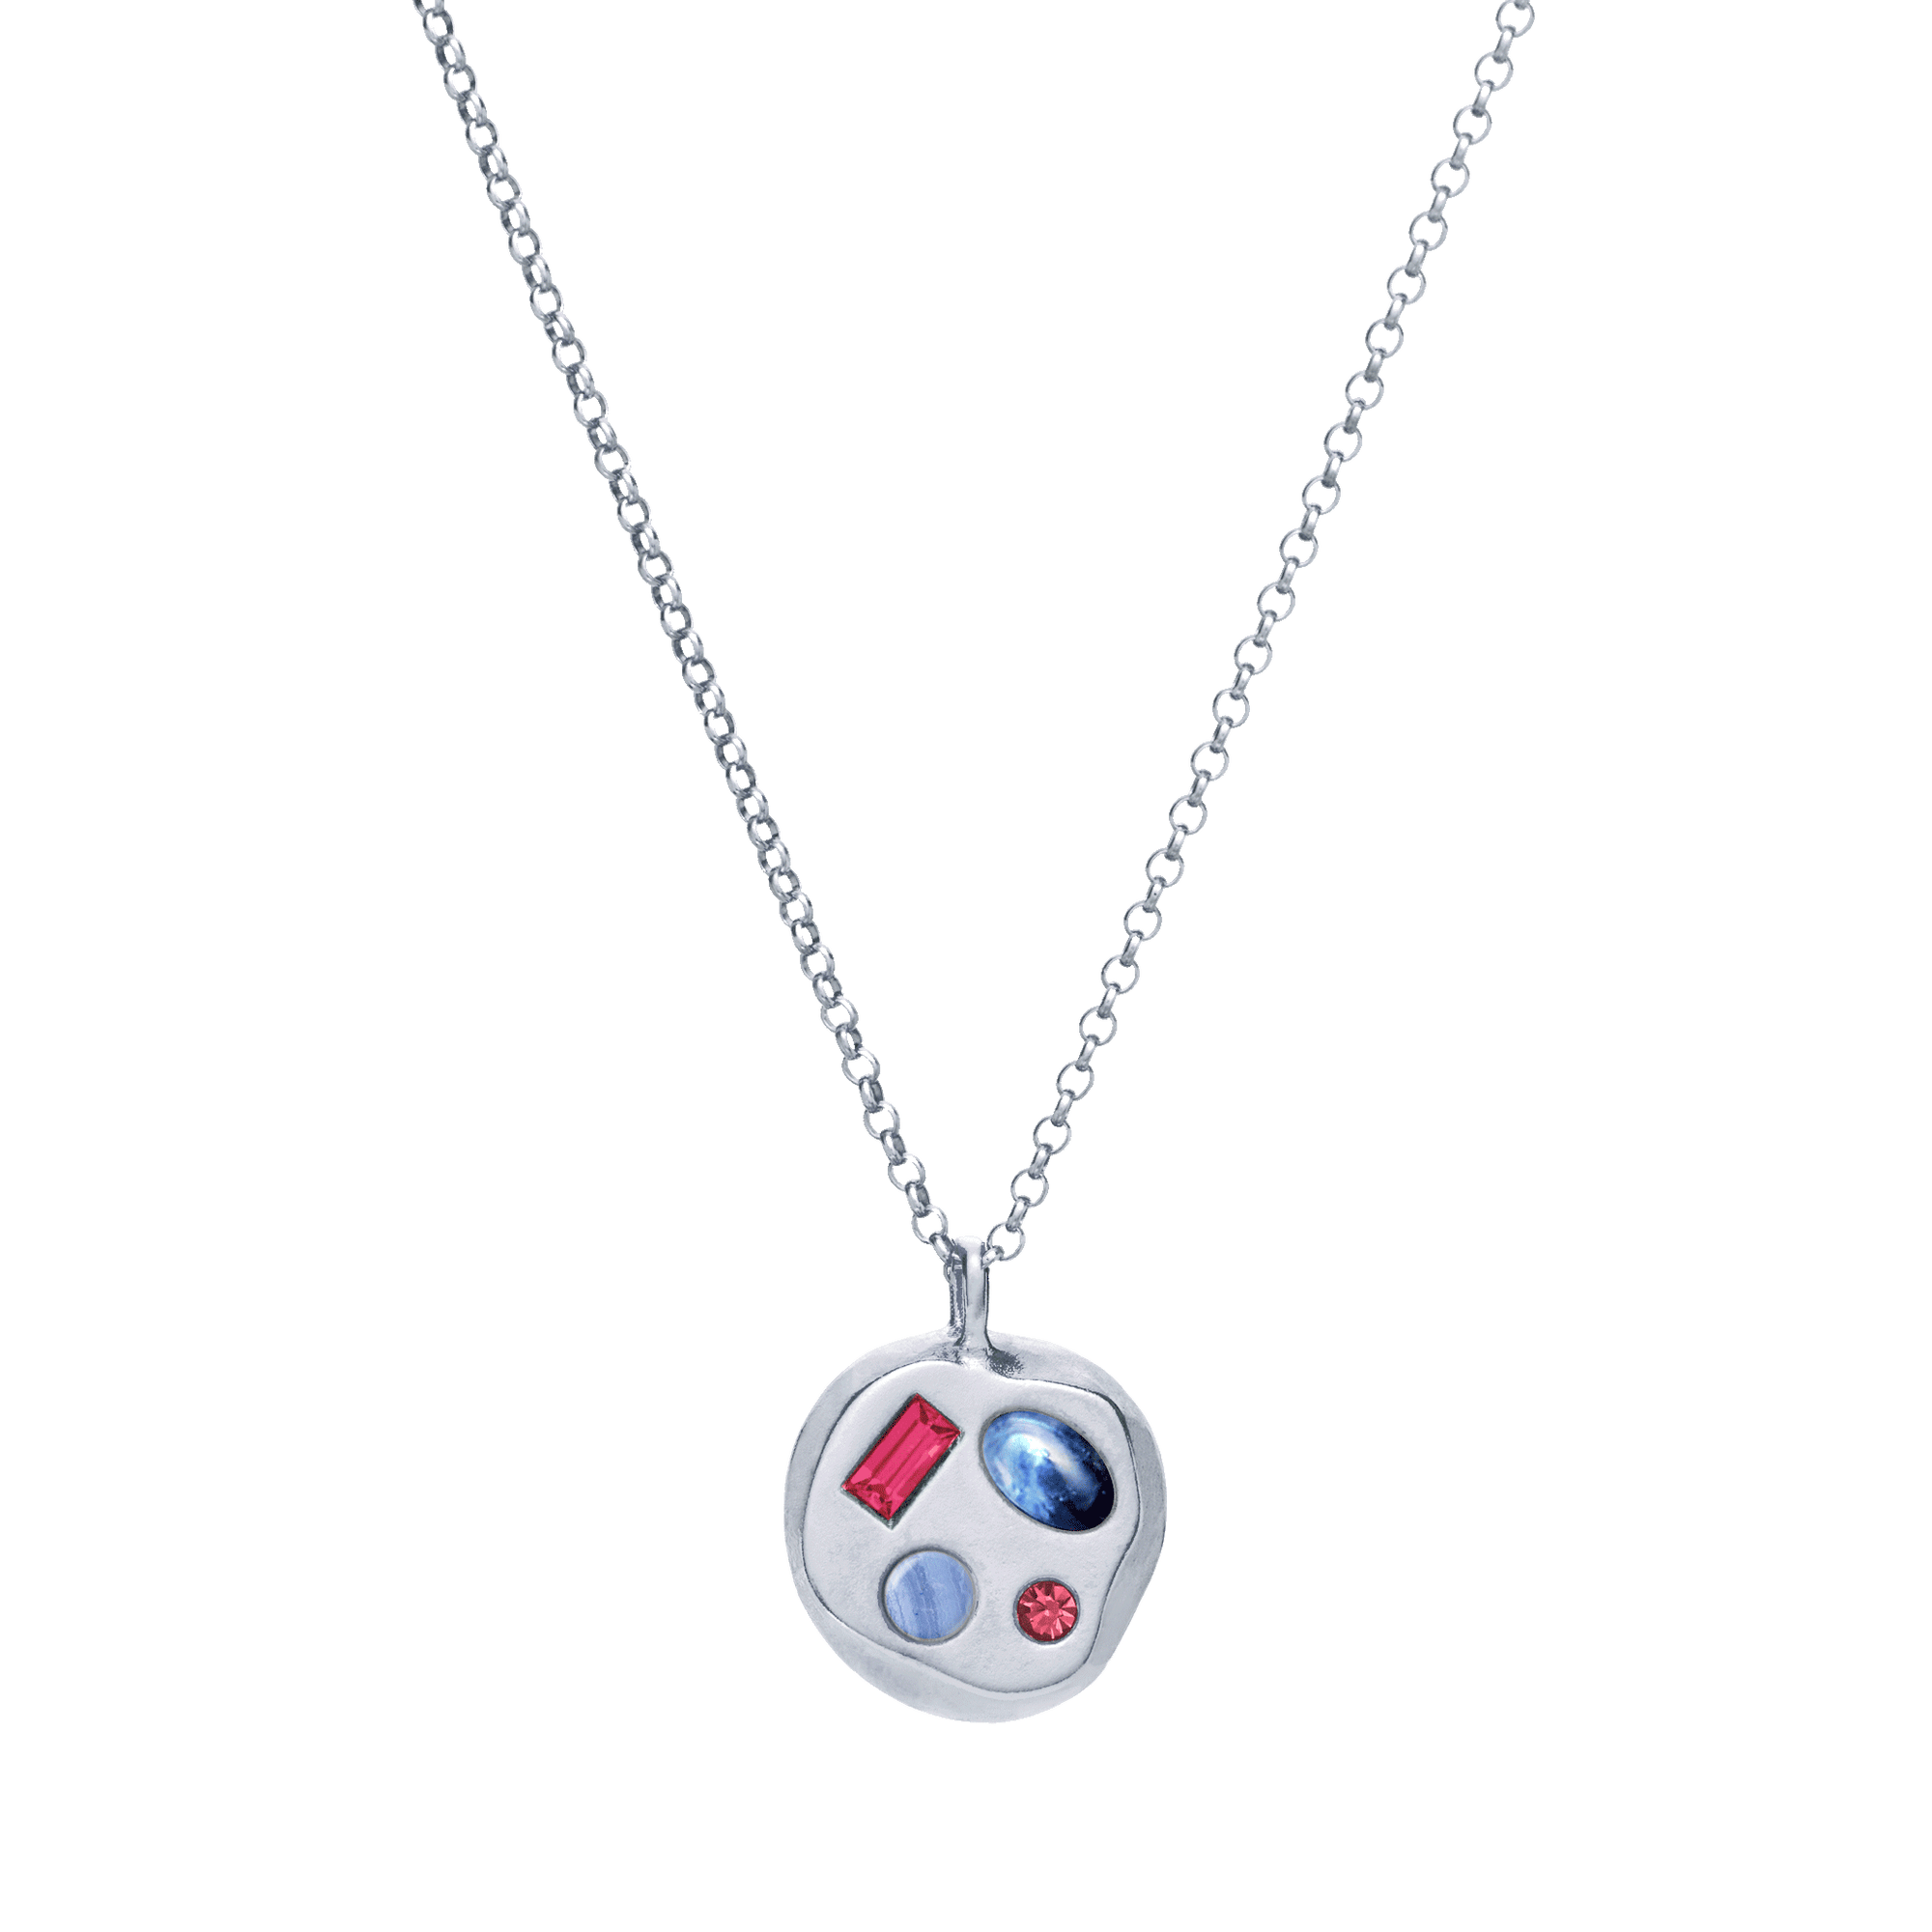 The July Ninth Pendant in Sterling Silver